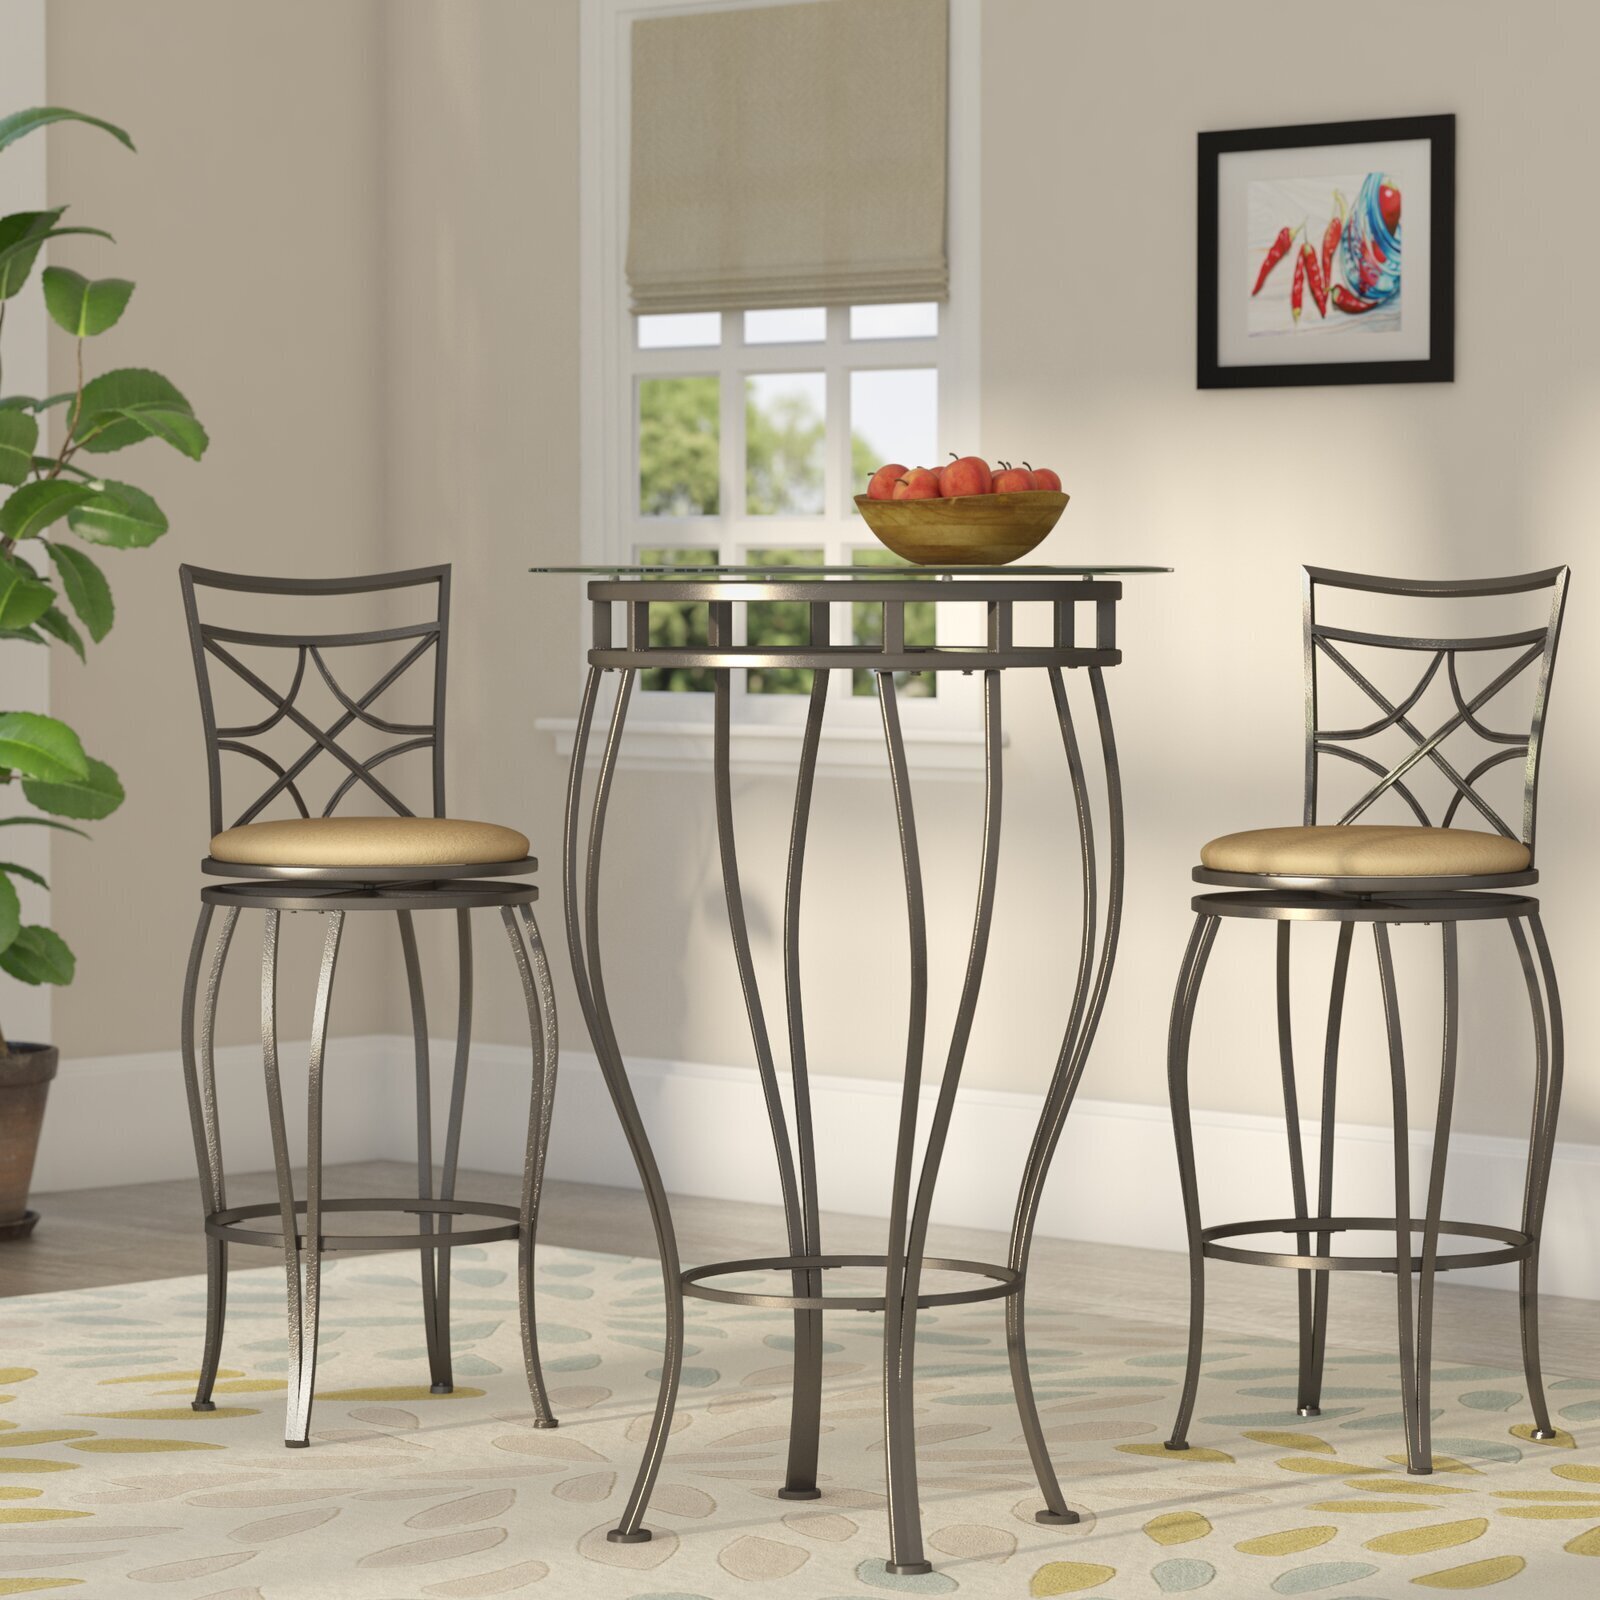 Lattice Pub Table and Chairs